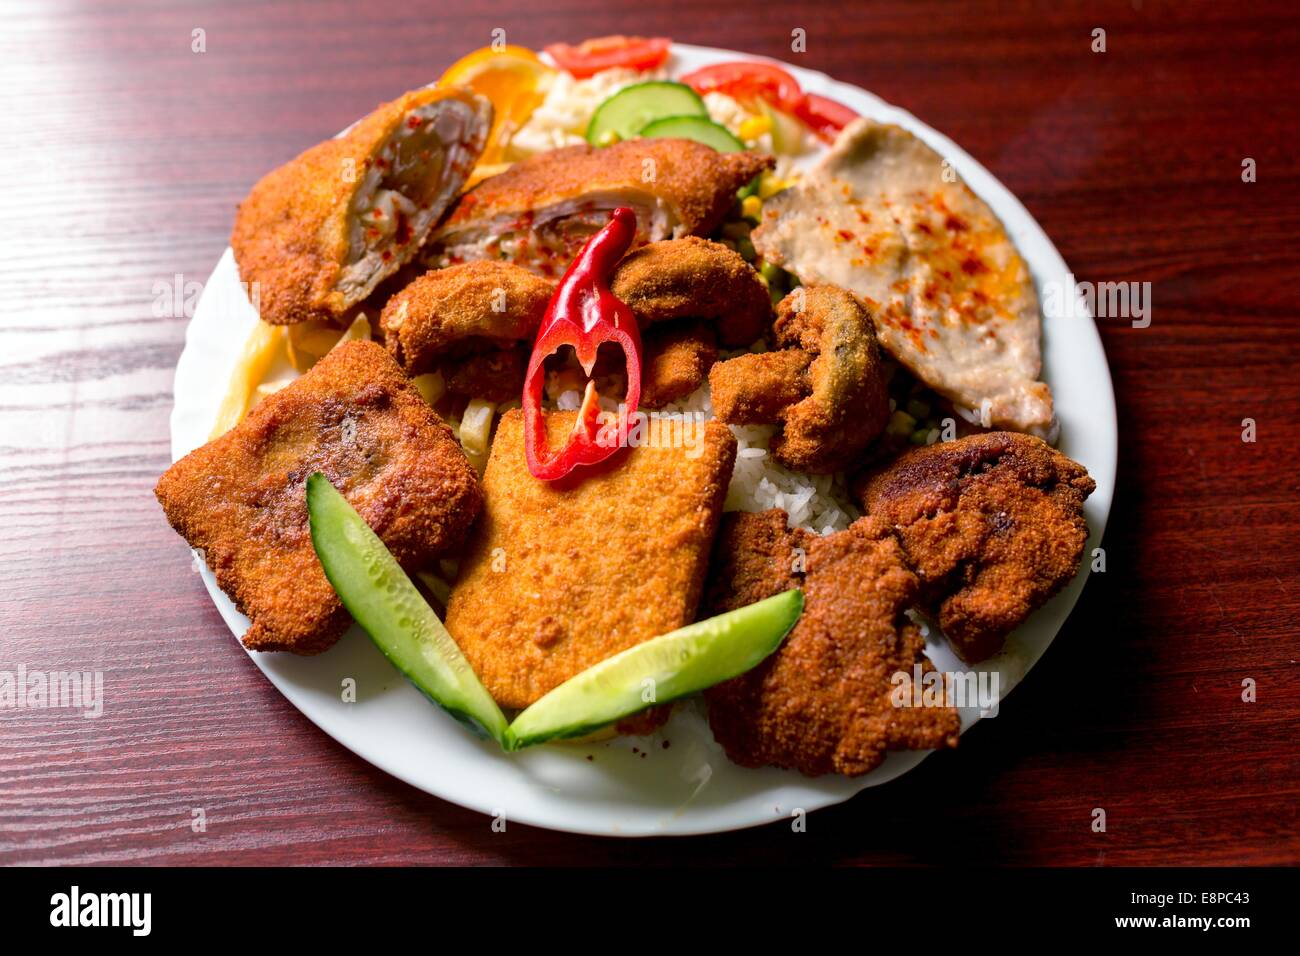 Delicious food on white plate Stock Photo